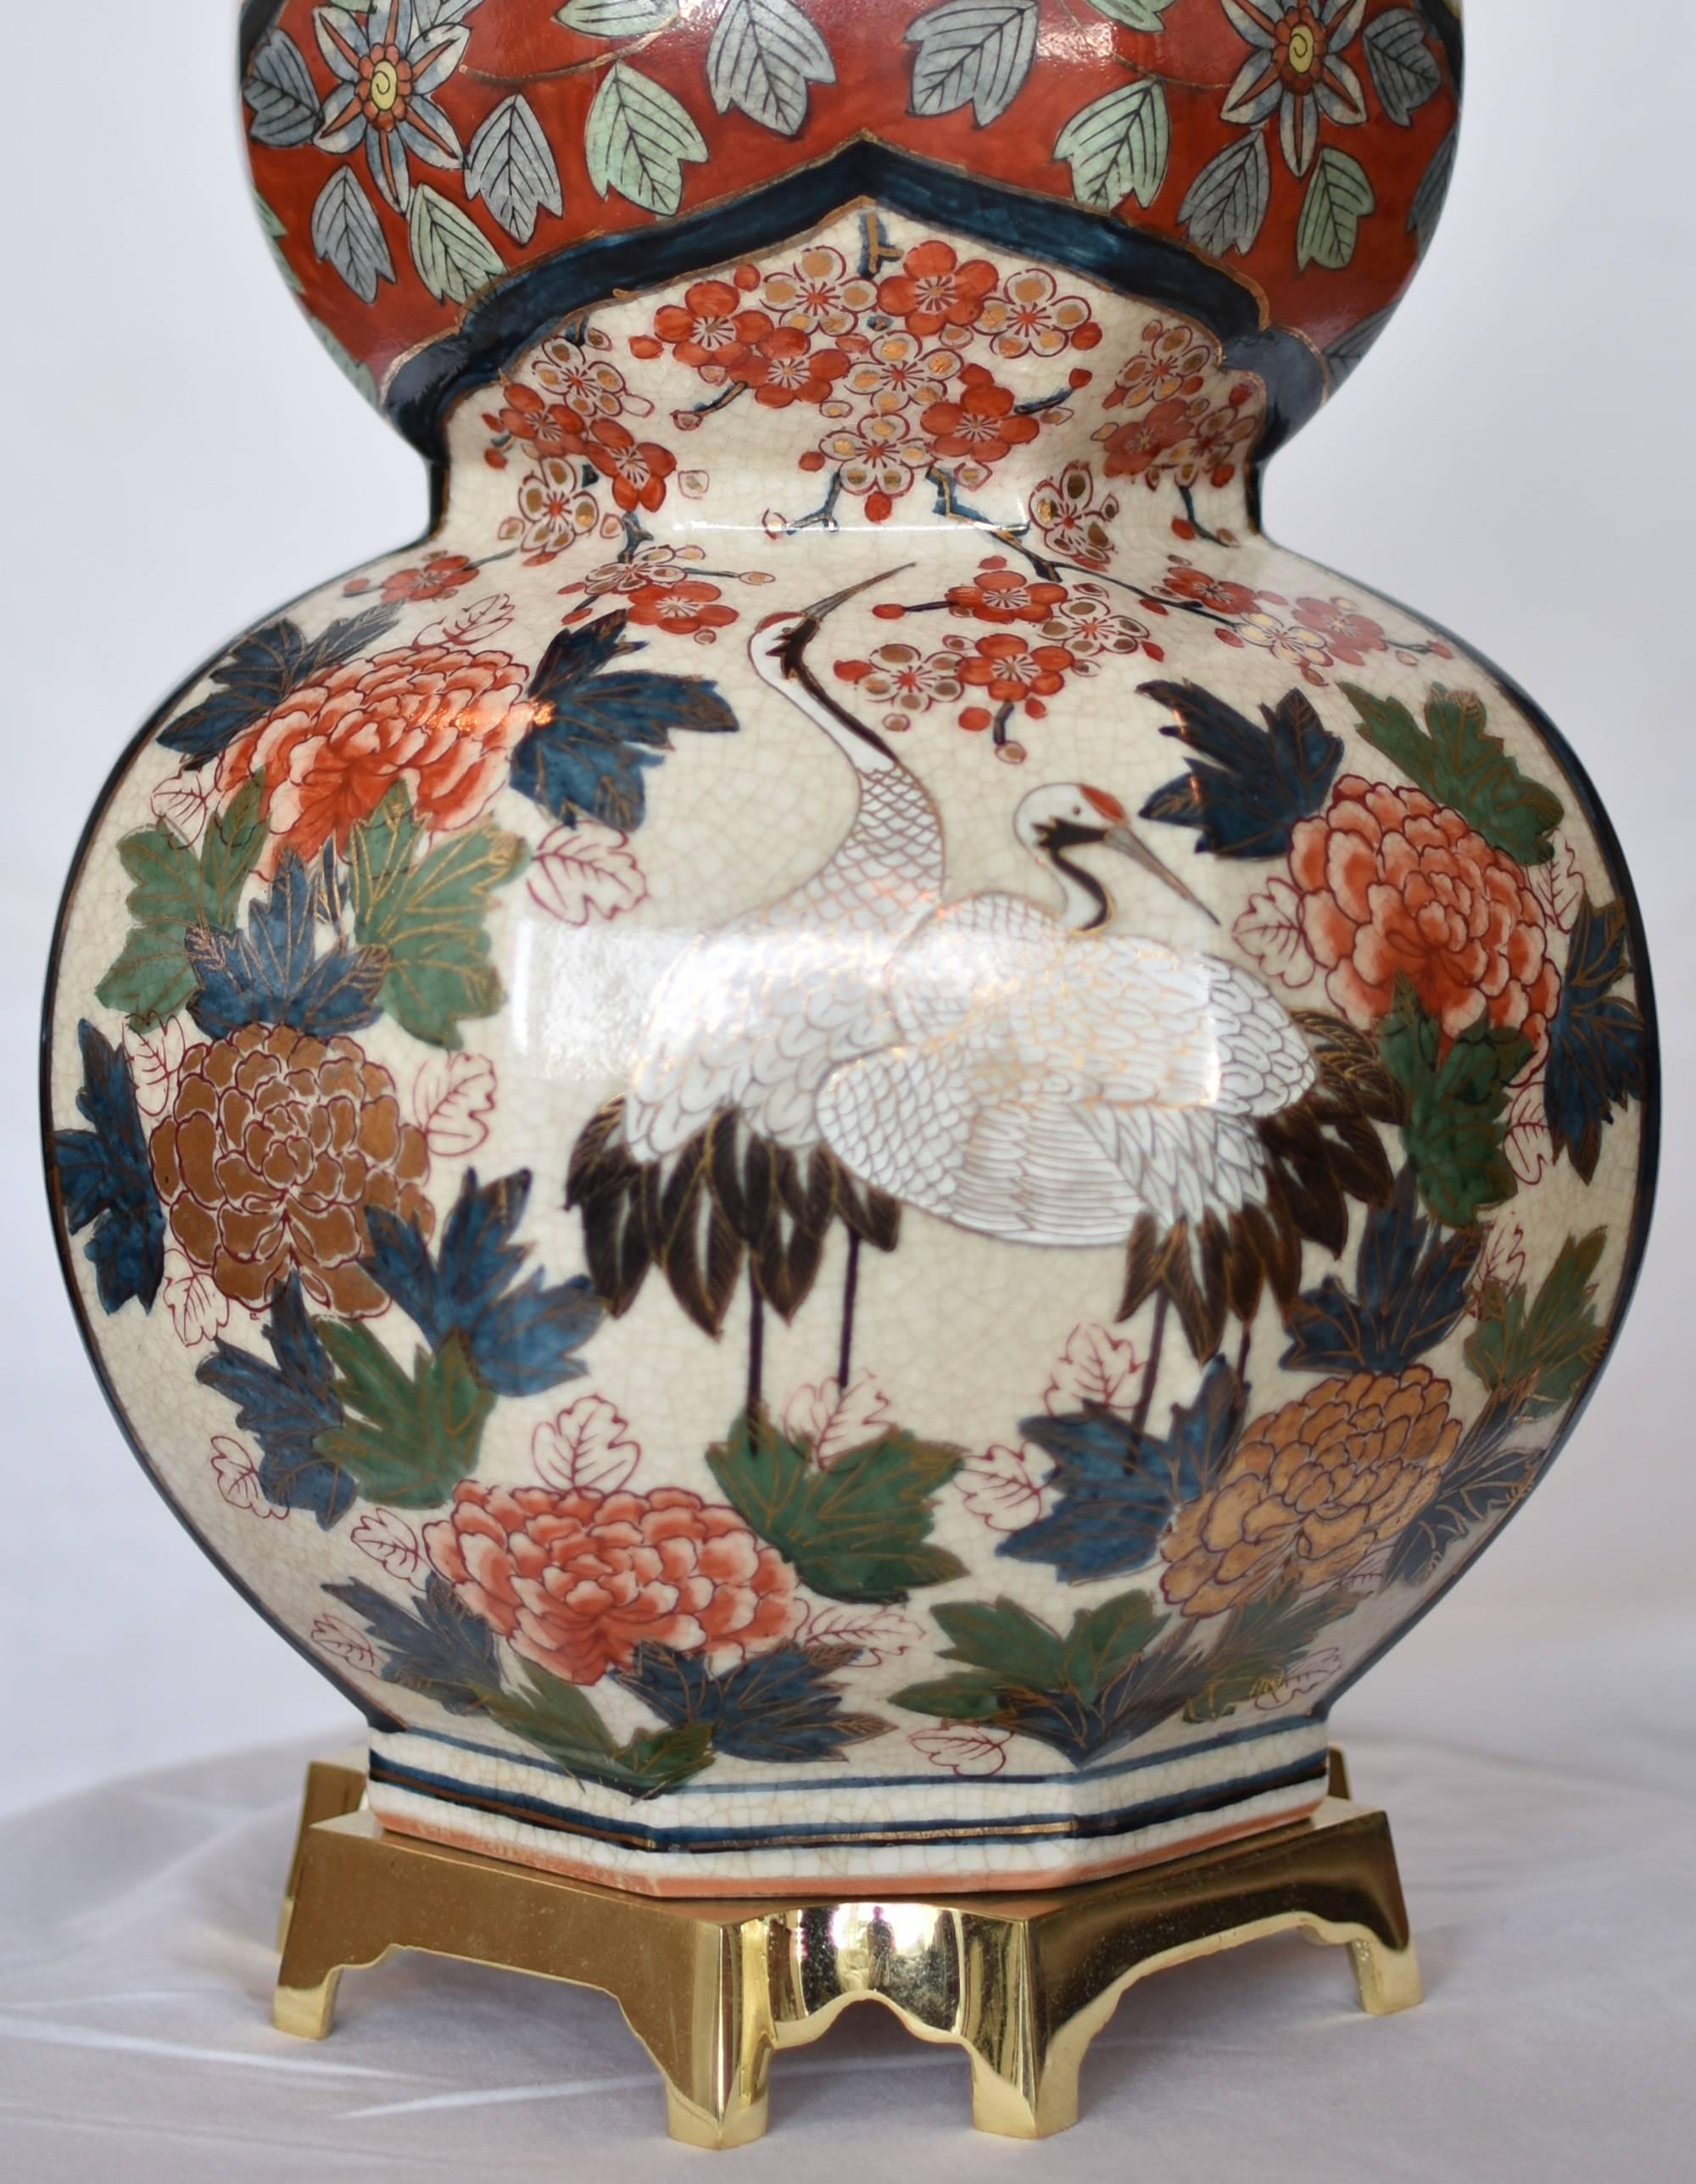 Unique very large Japanese Imari gilded and intricately hand painted porcelain table lamp in an auspicious double gourd crackled fine porcelain body in red and green, showcasing two panels with creamy white background, one depicting two graceful